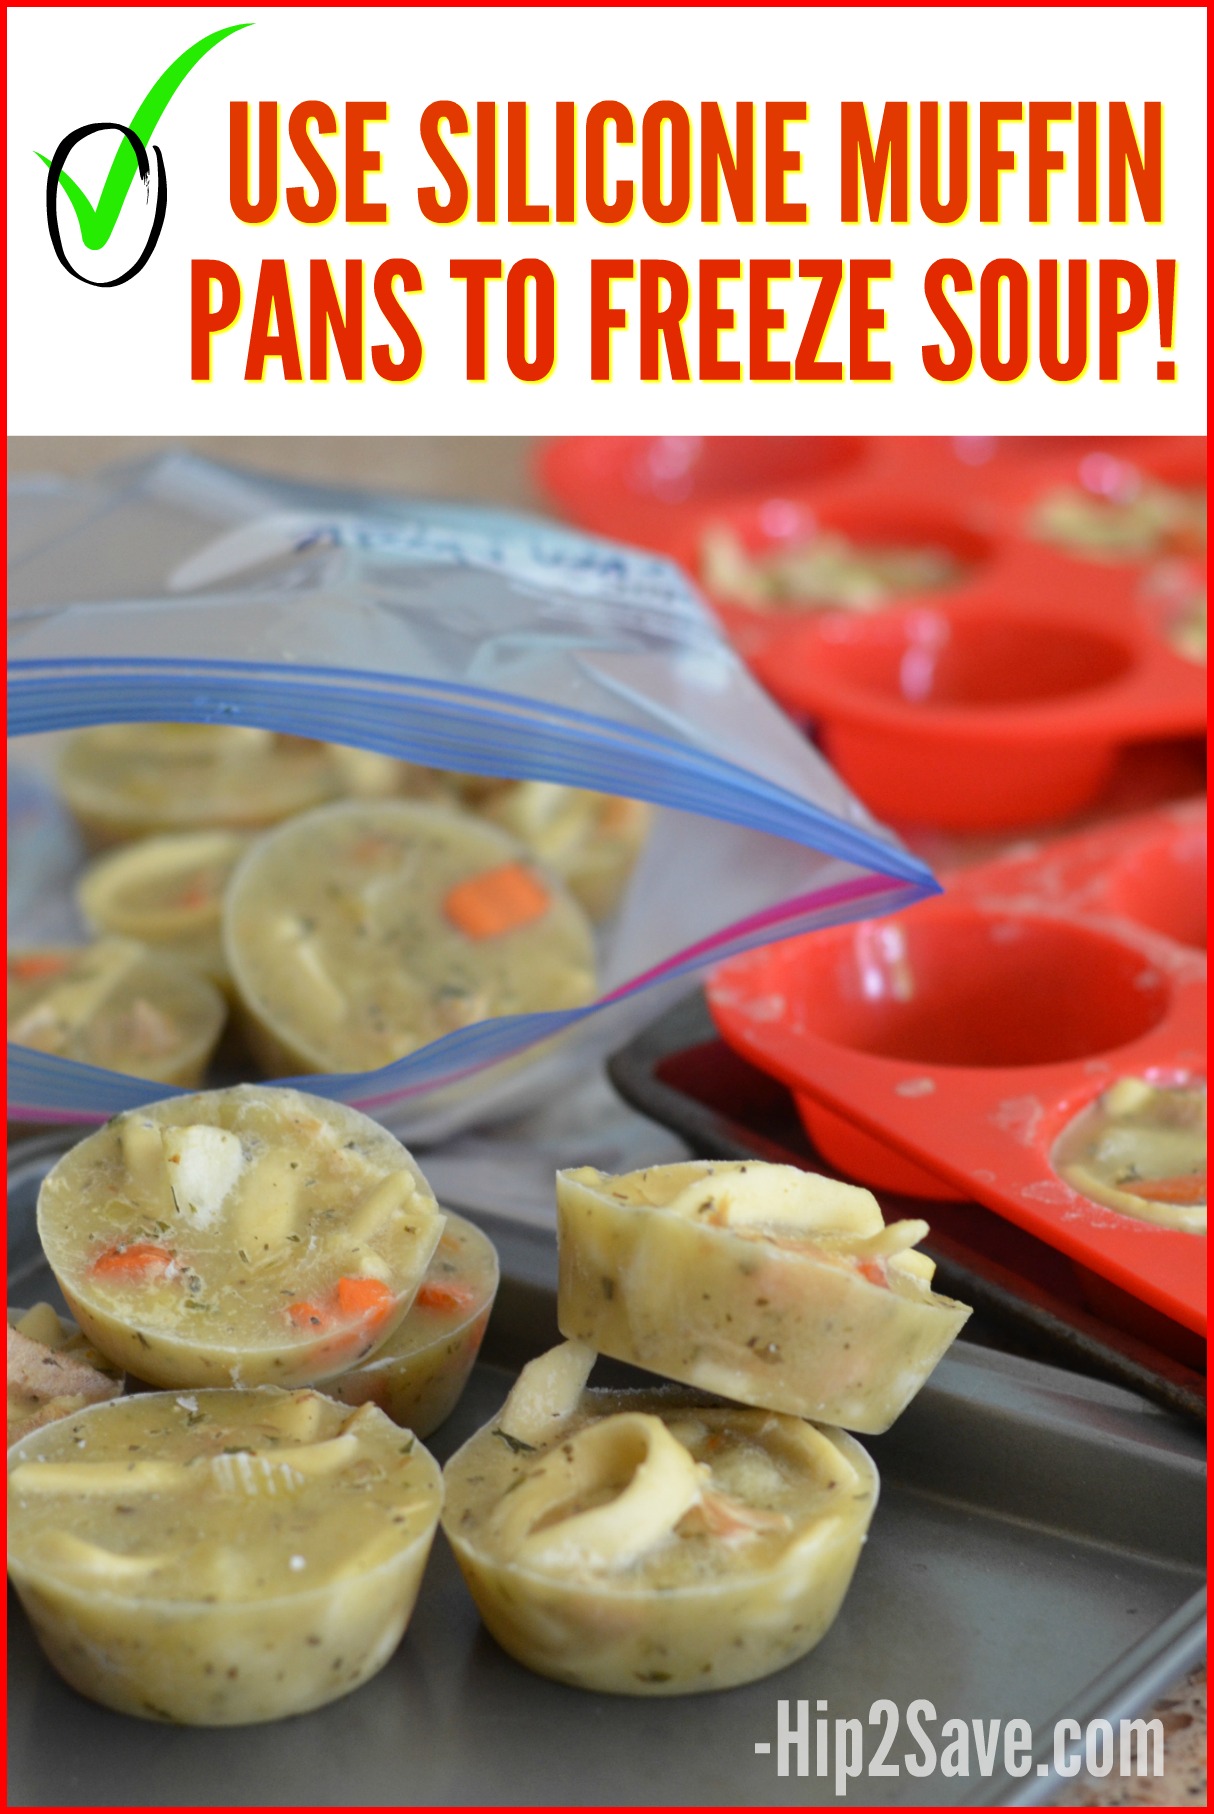 How To Freeze Soup - Appliance Express